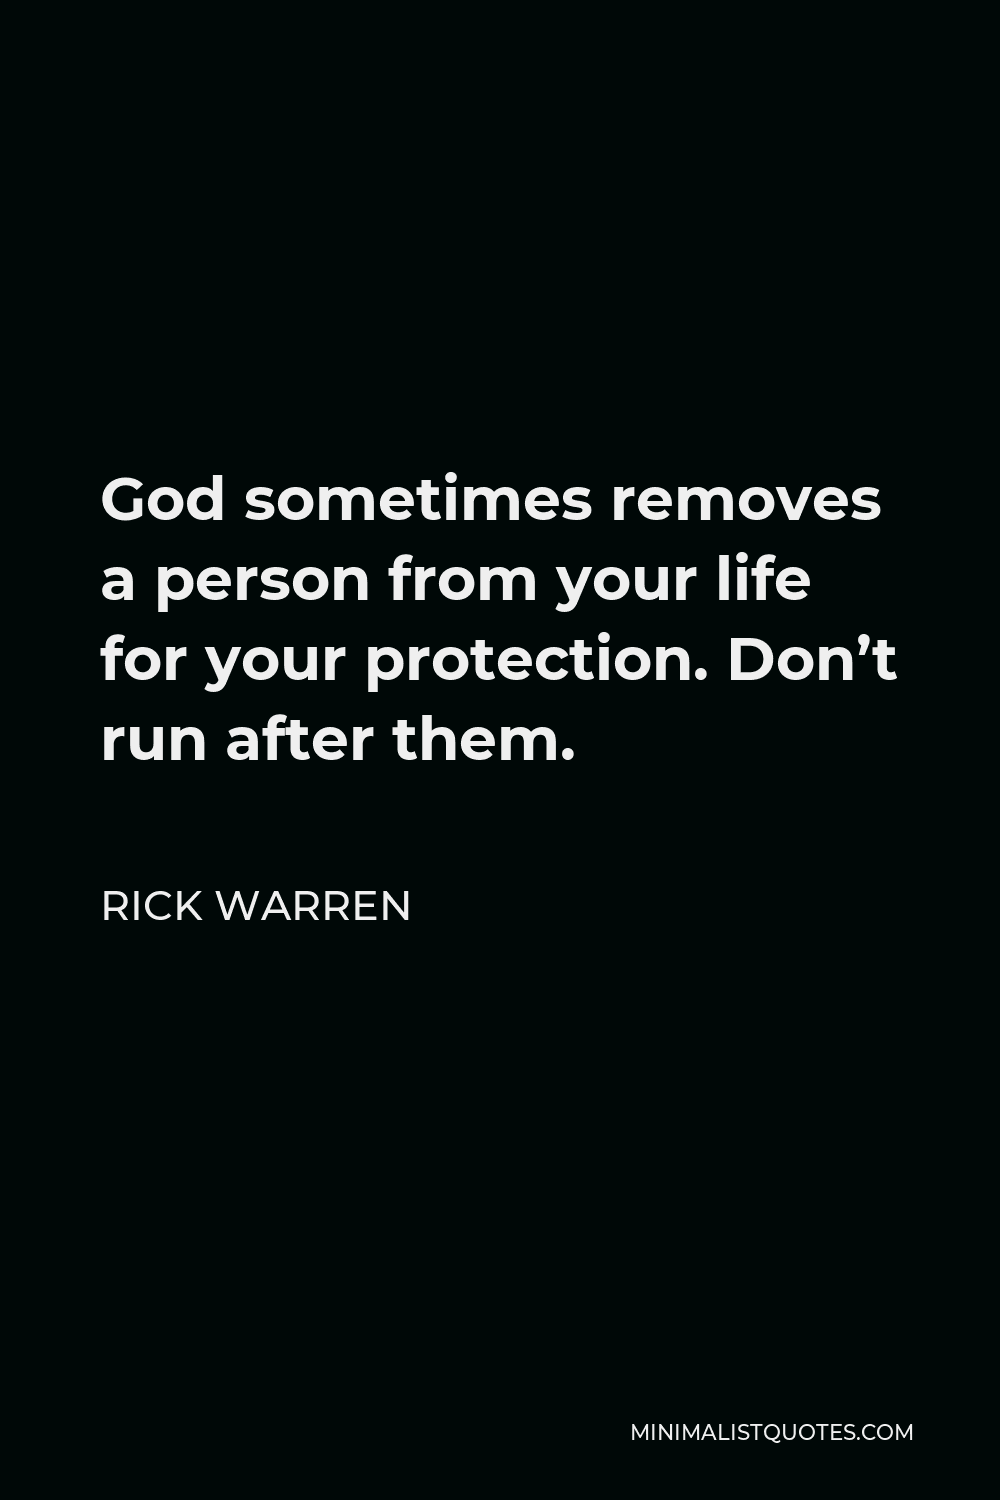 Rick Warren Quote - God sometimes removes a person from your life for your protection. Don’t run after them.